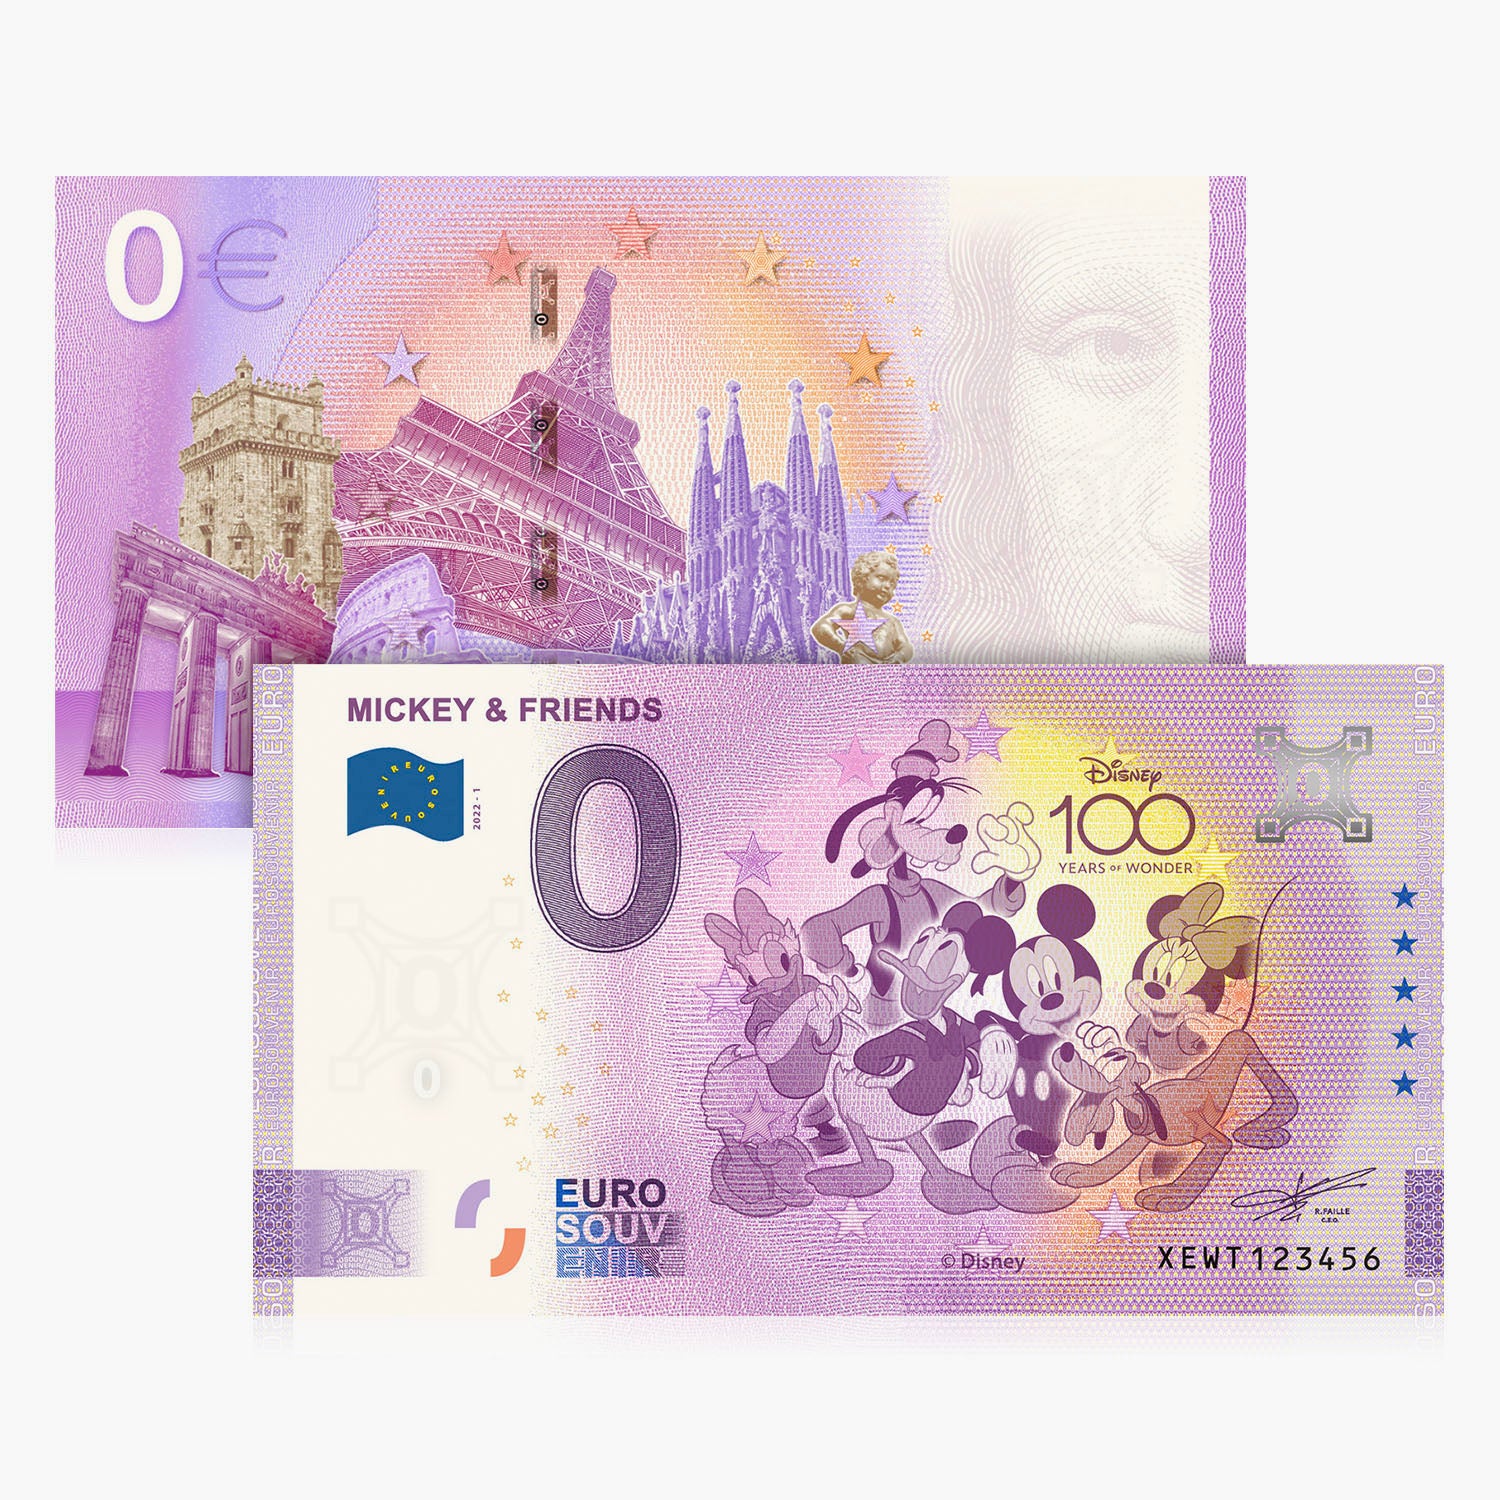 The Disney 100th Anniversary 0 Euro Banknote Collection